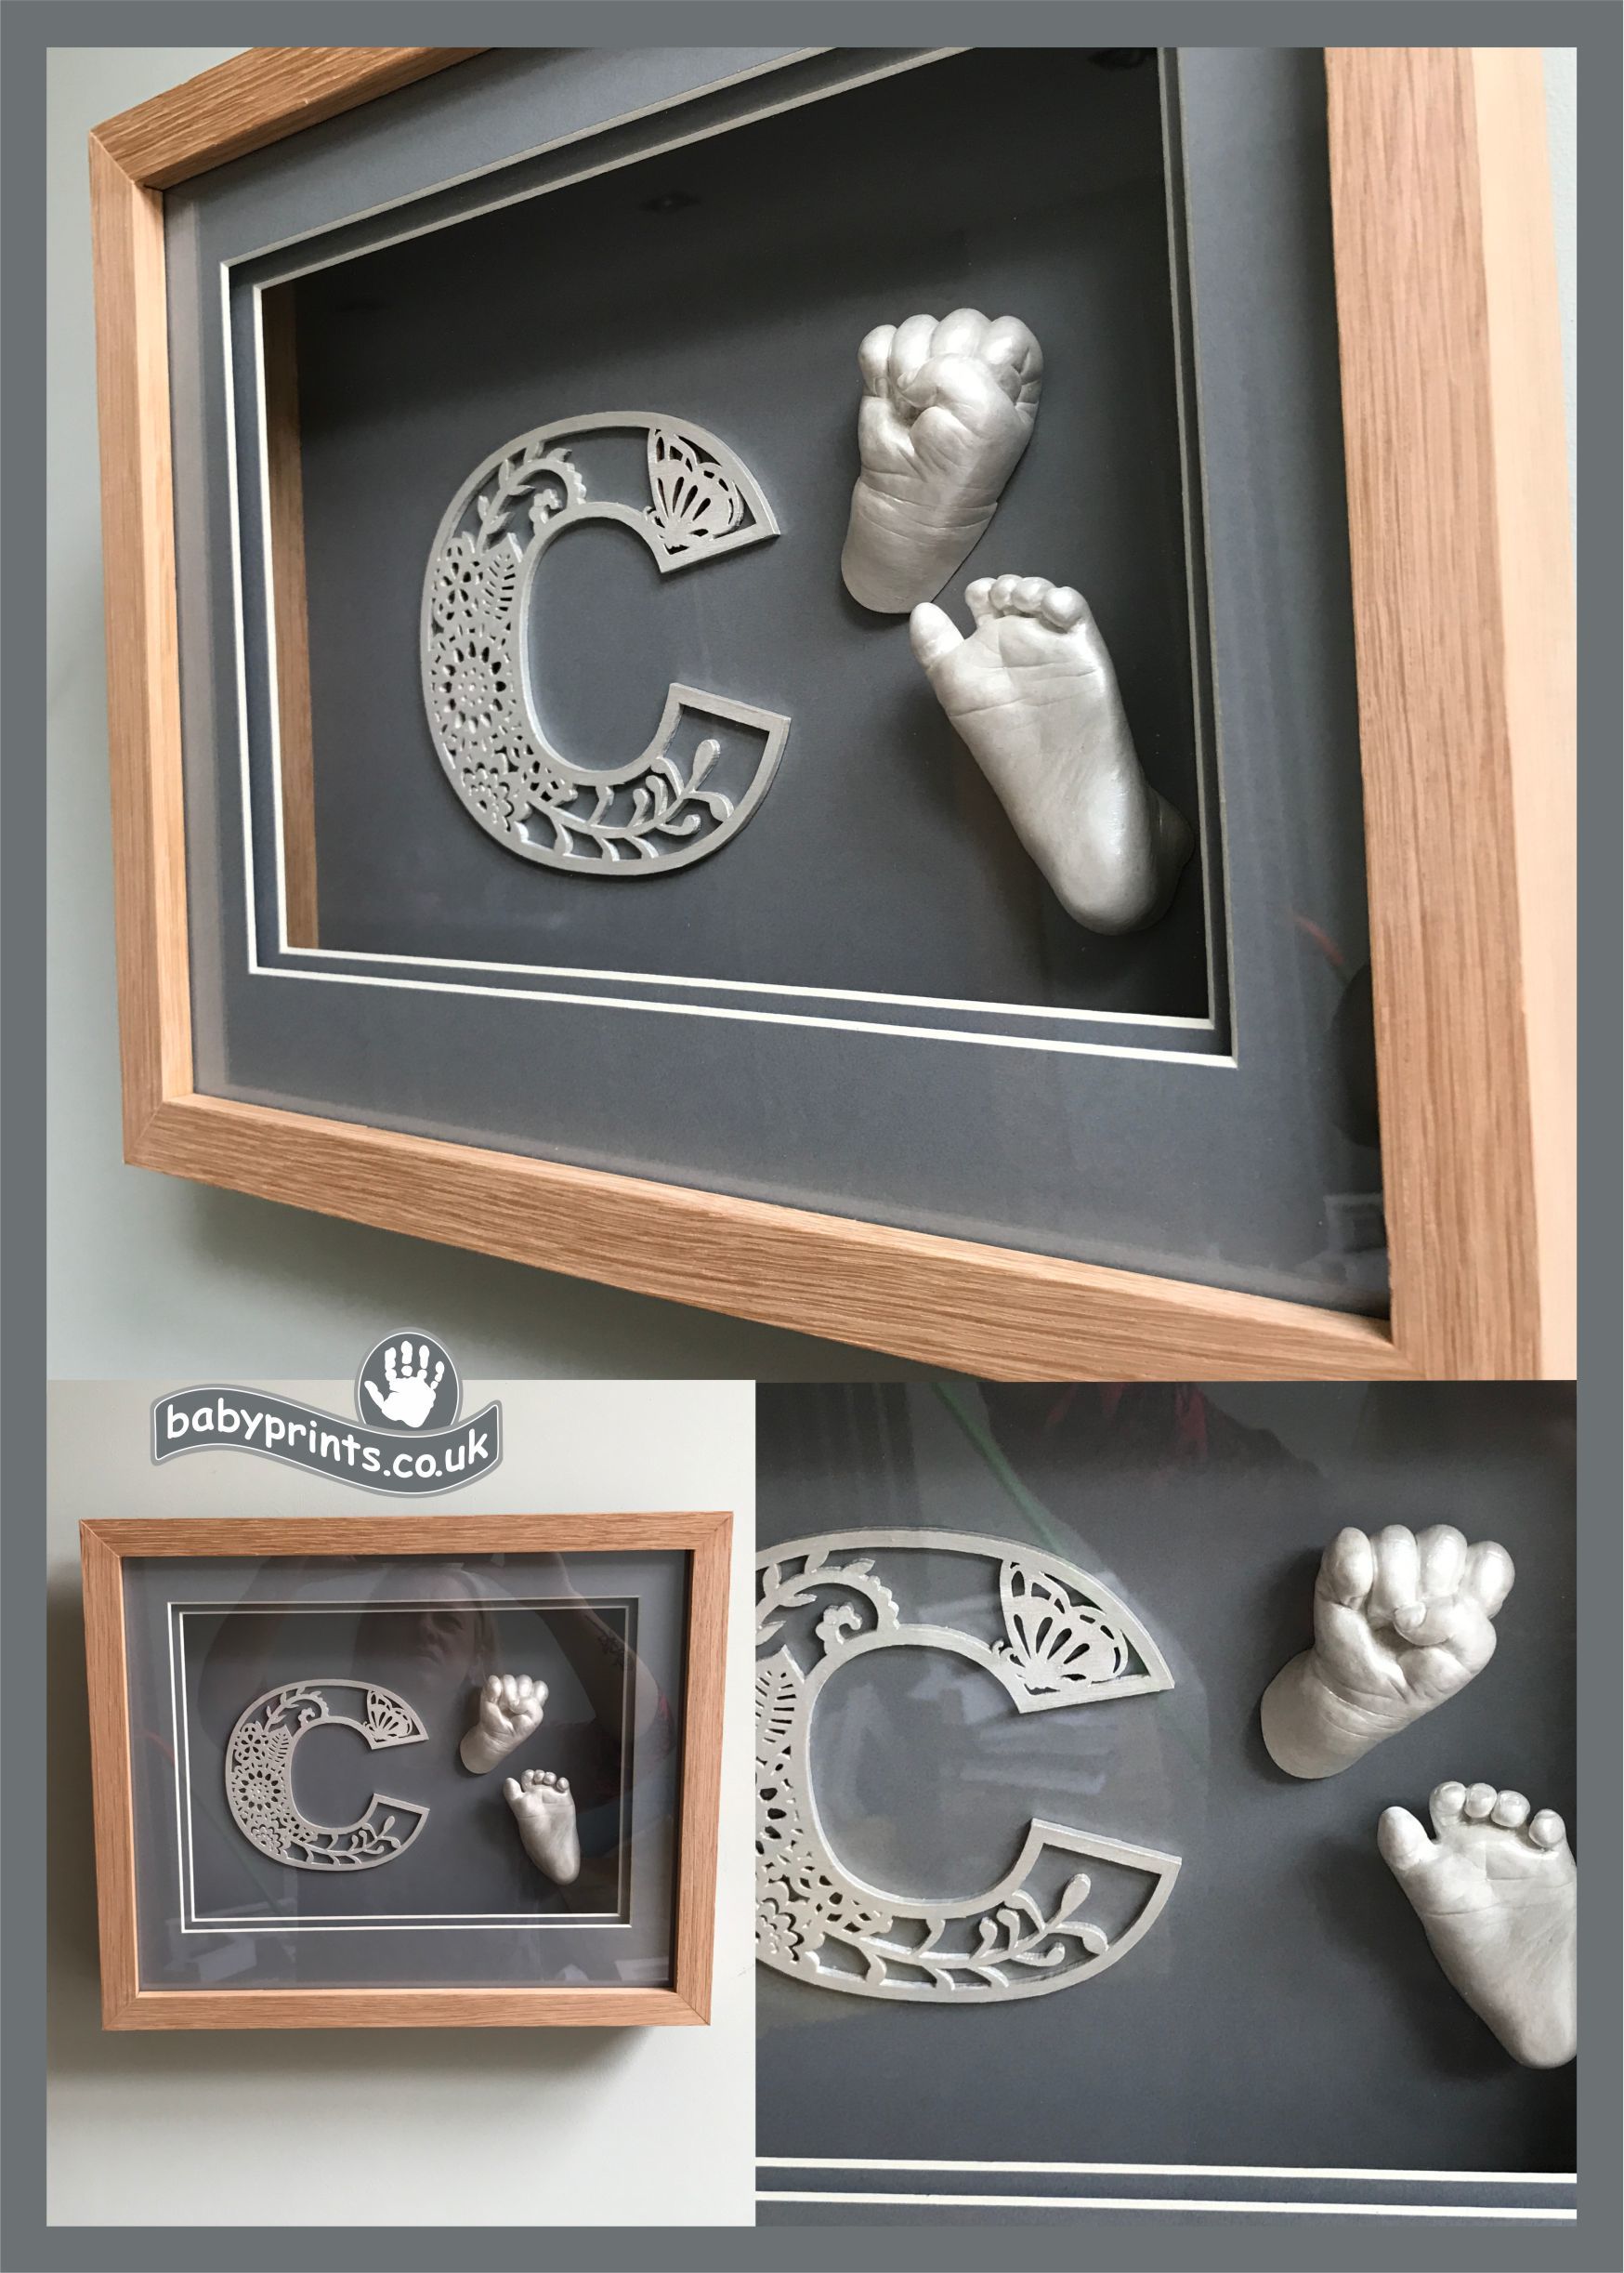 Thoughtful gifts from Babyprints